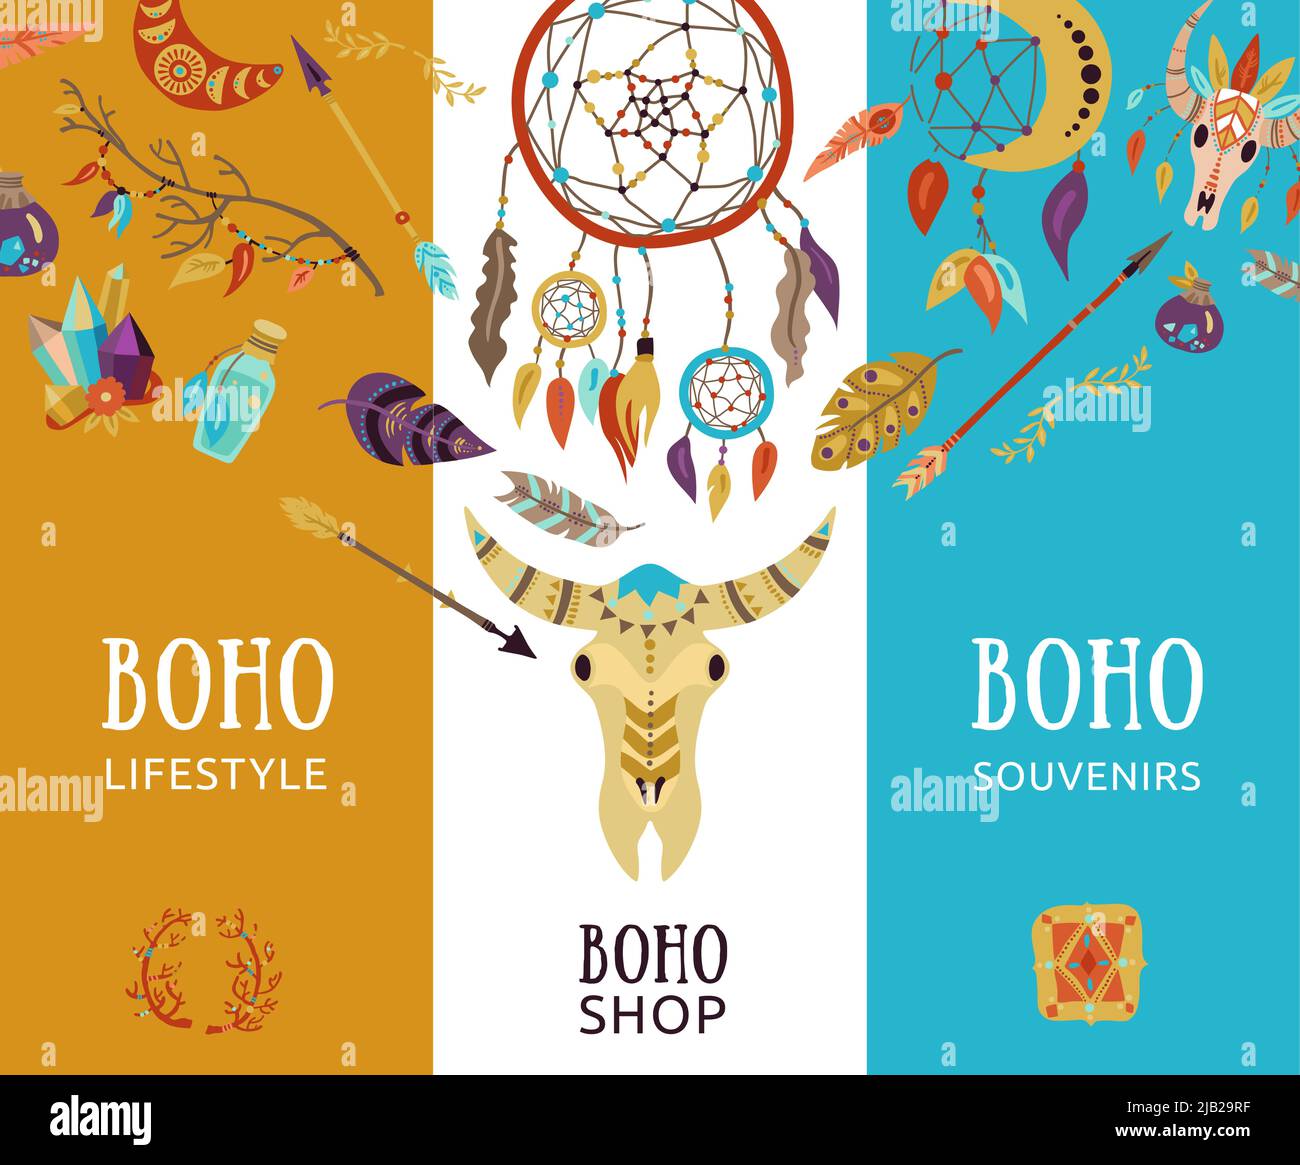 Boho souvenir lifestyle decorative elements 3 vertical banners with buffalo head dream catcher arrows isolated vector illustration Stock Vector